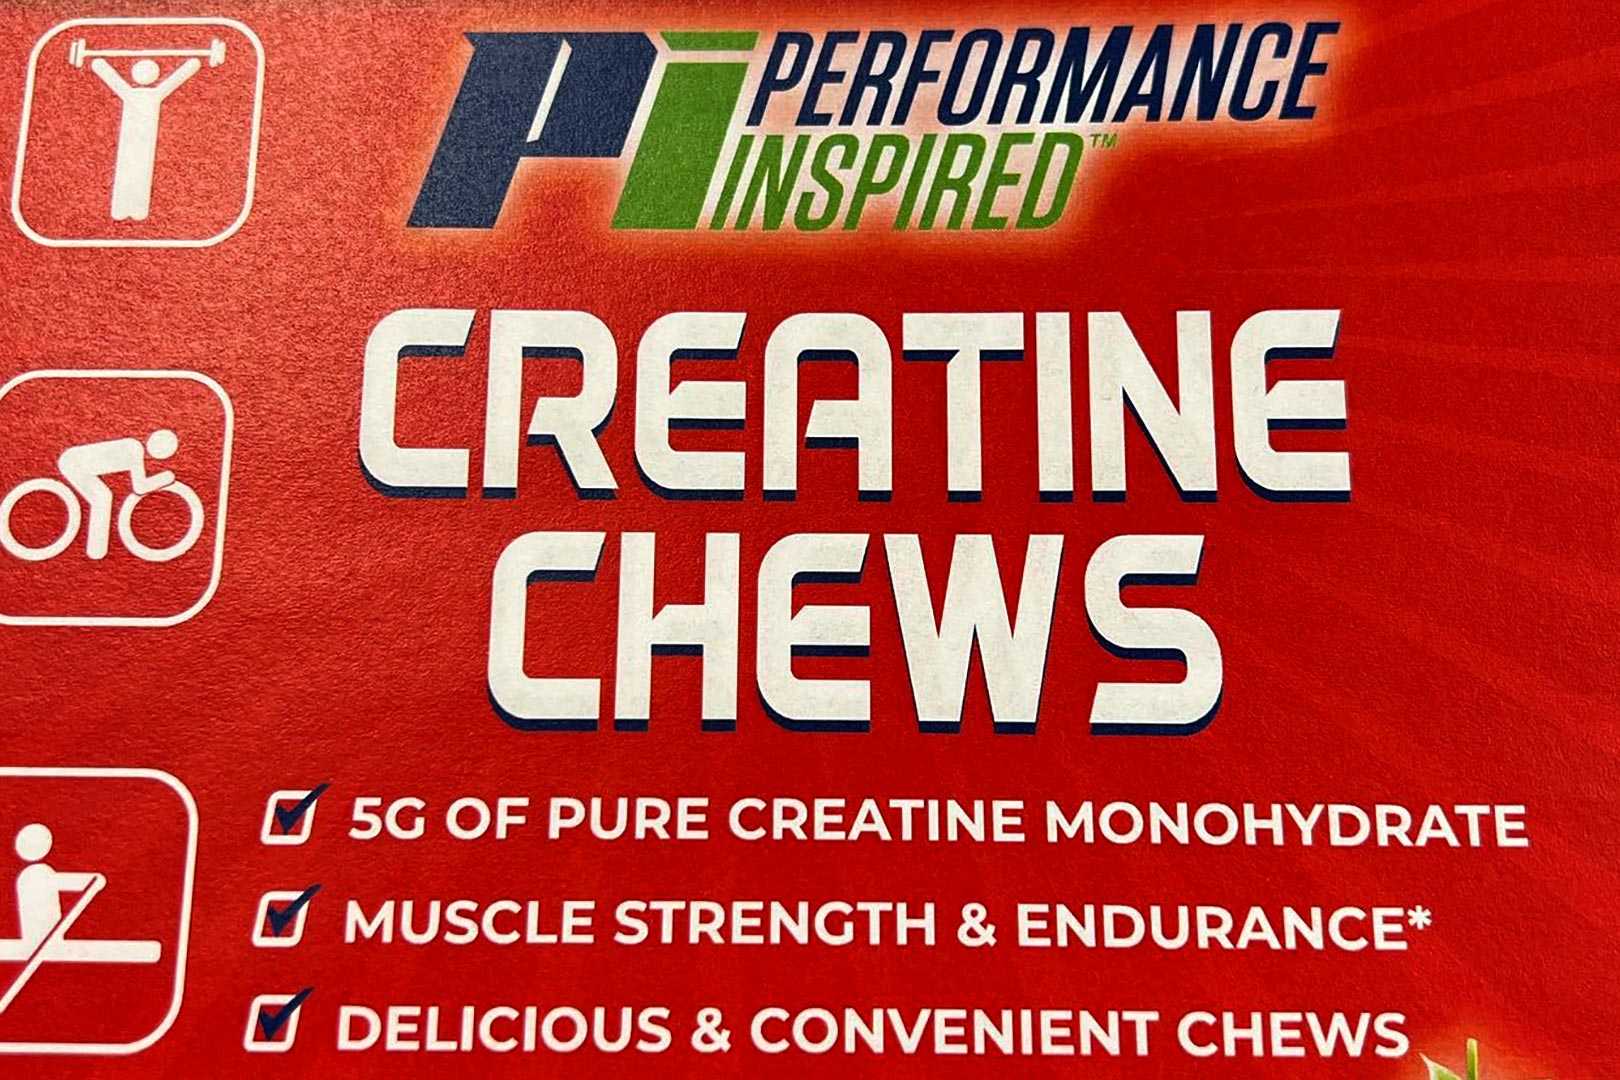 Performance Inspired  previews Creatine Chews and Collagen Biotin